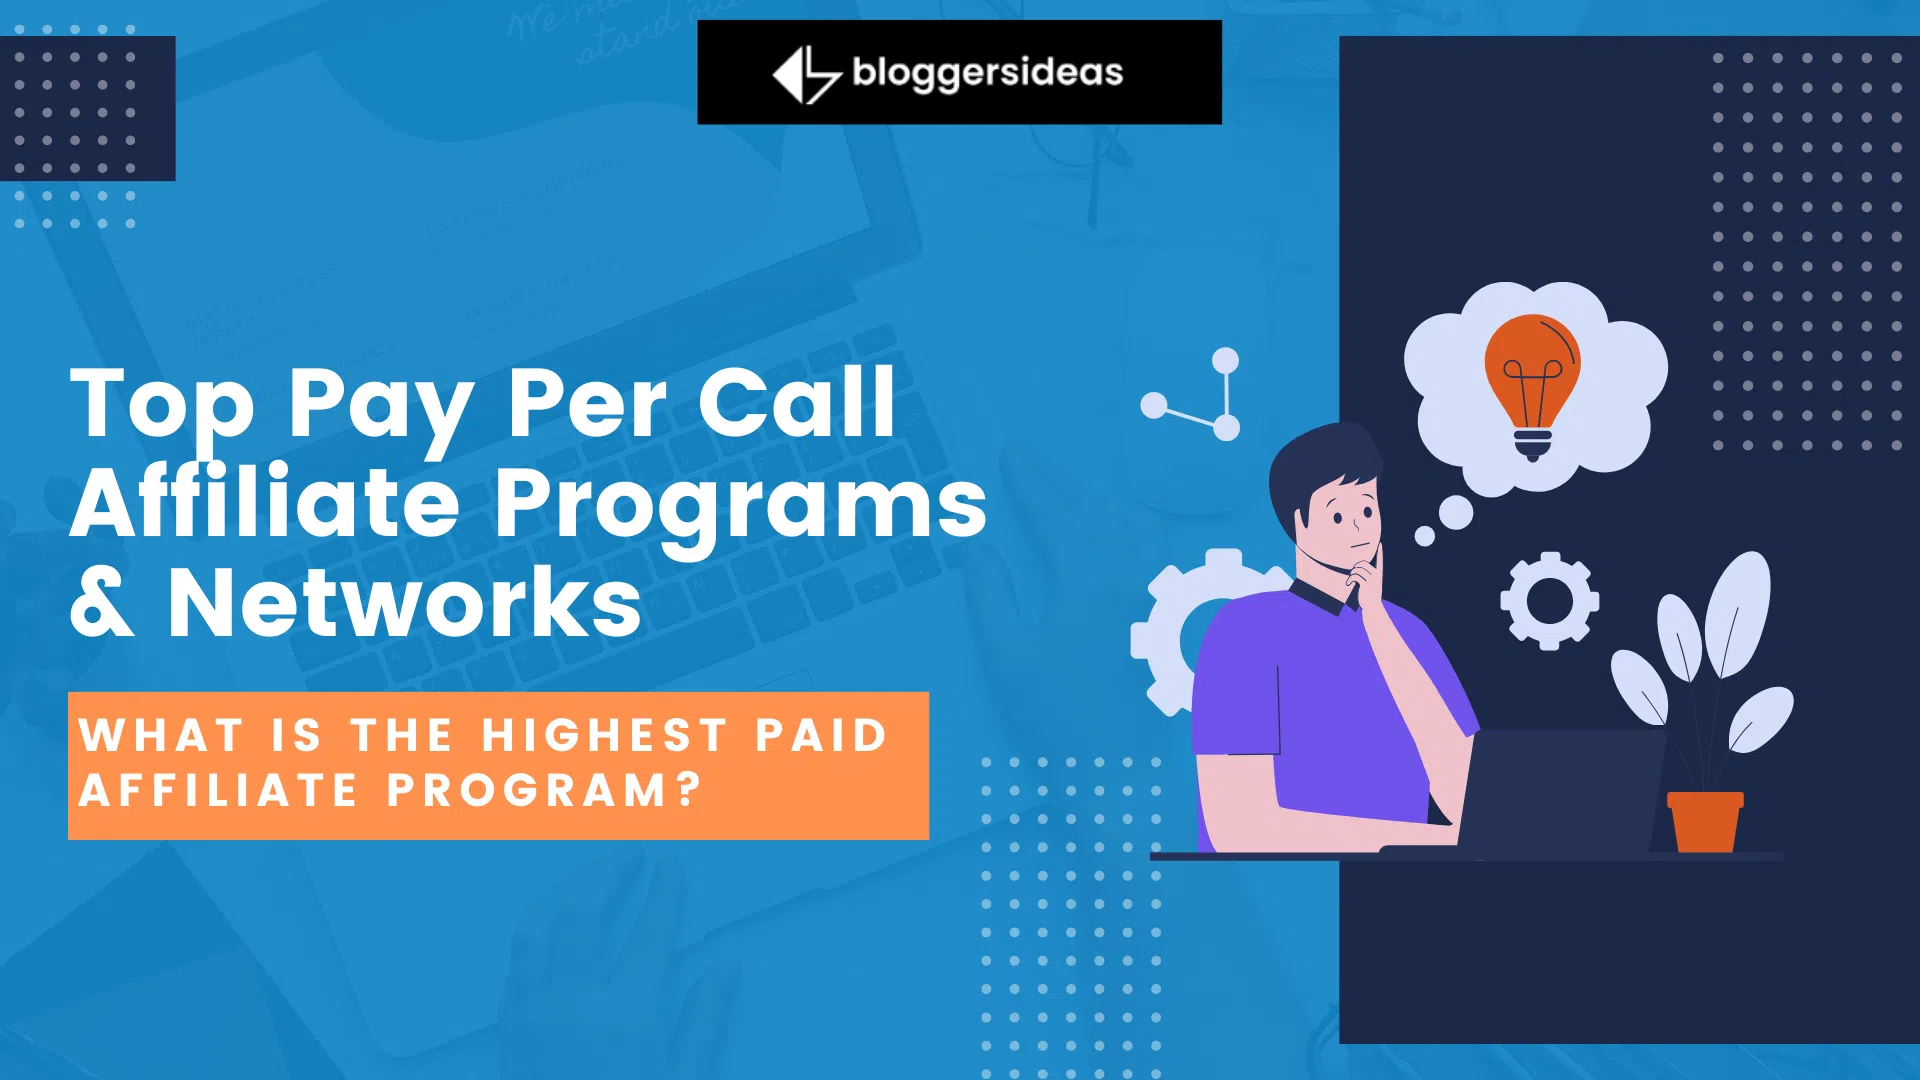 Top Pay Per Call Affiliate Programs & Networks